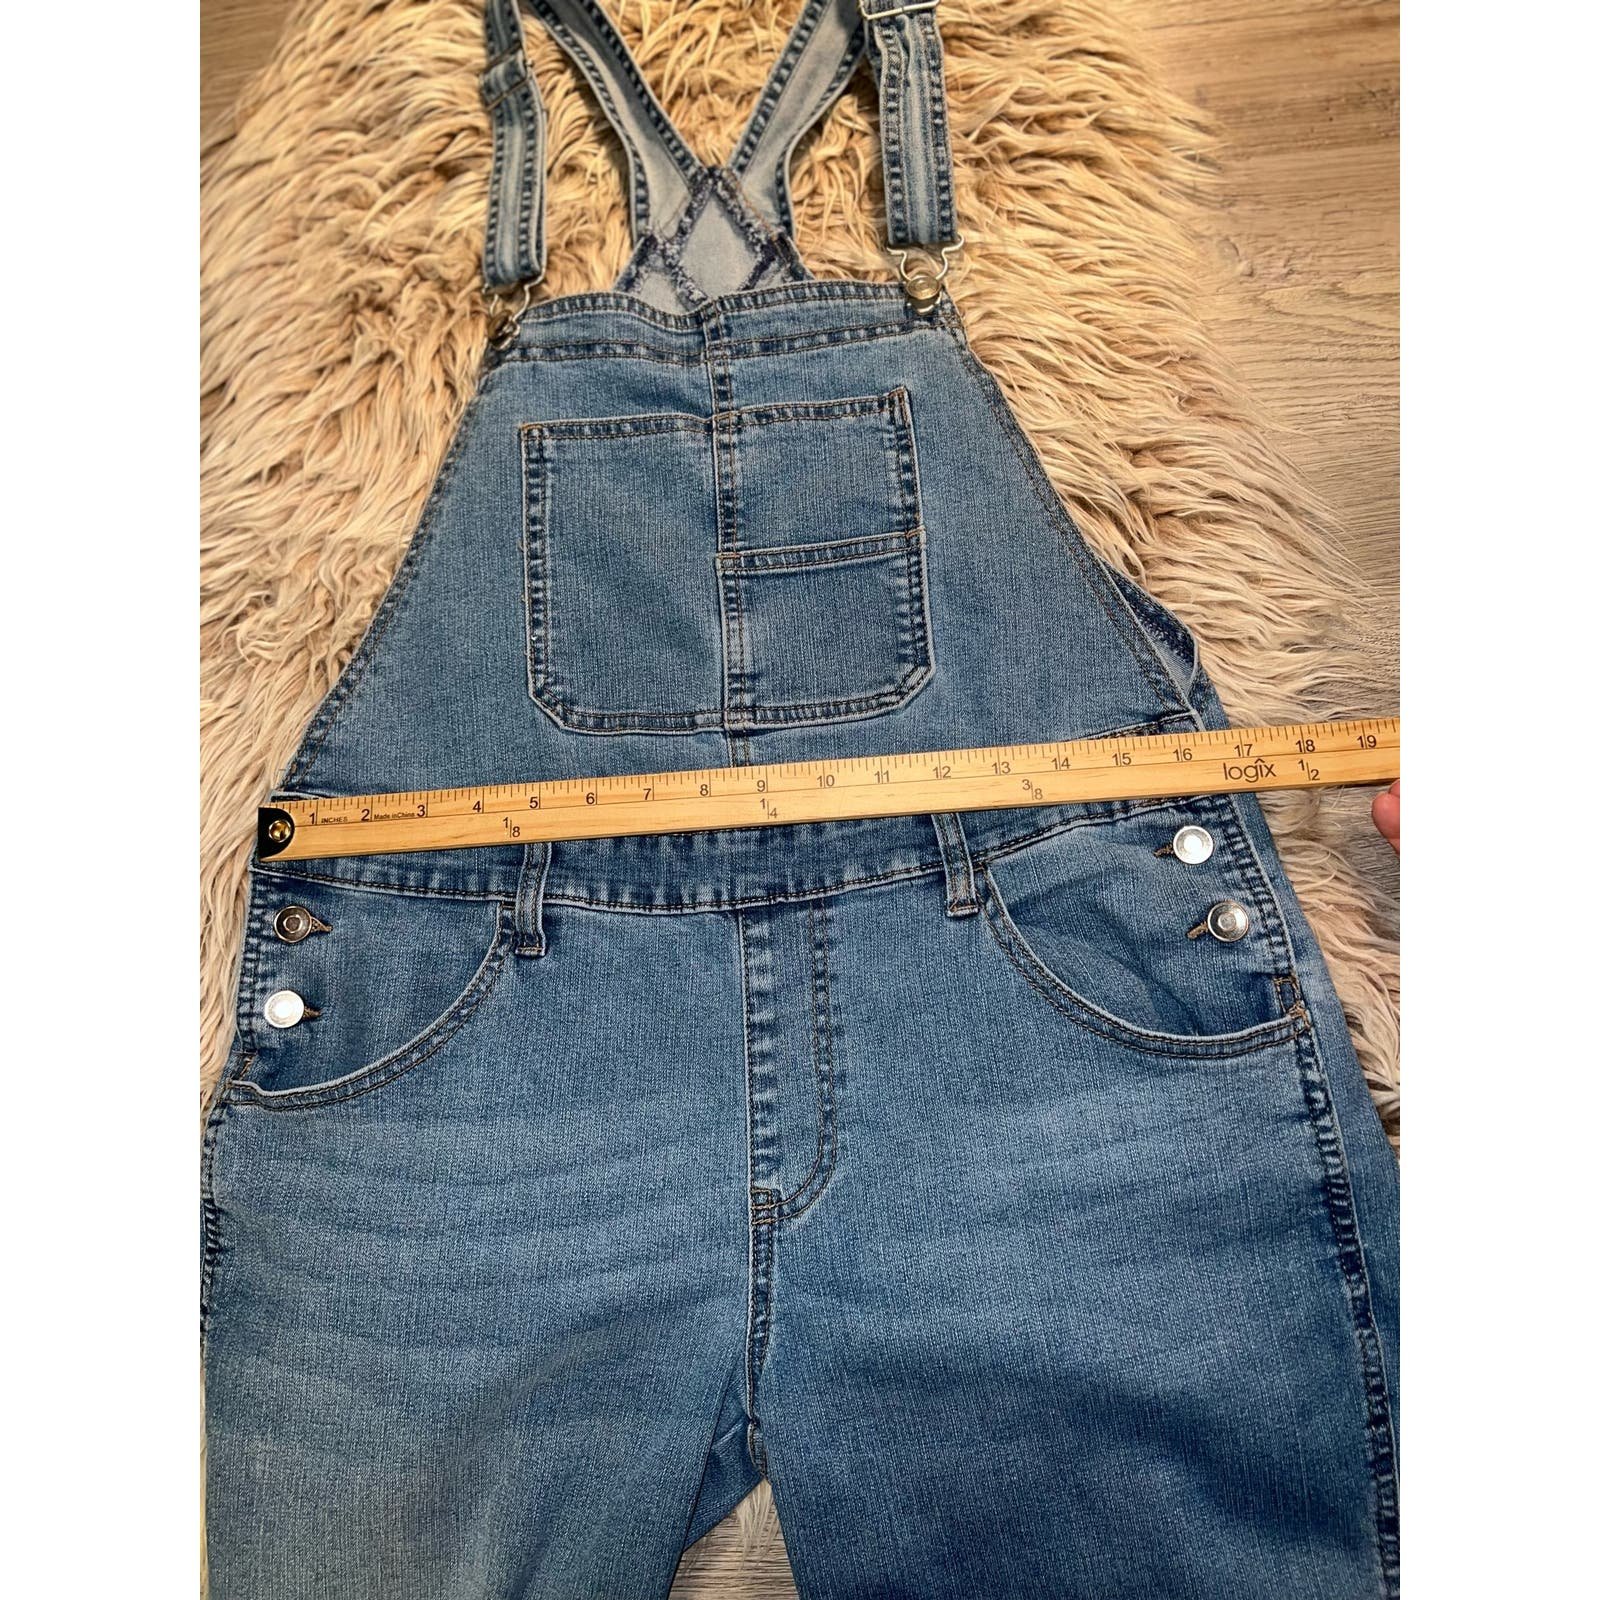 cheapest place to buy  Celebrity pink women’s distressed blue jean overalls OIfA2UpSa Counter Genuine 